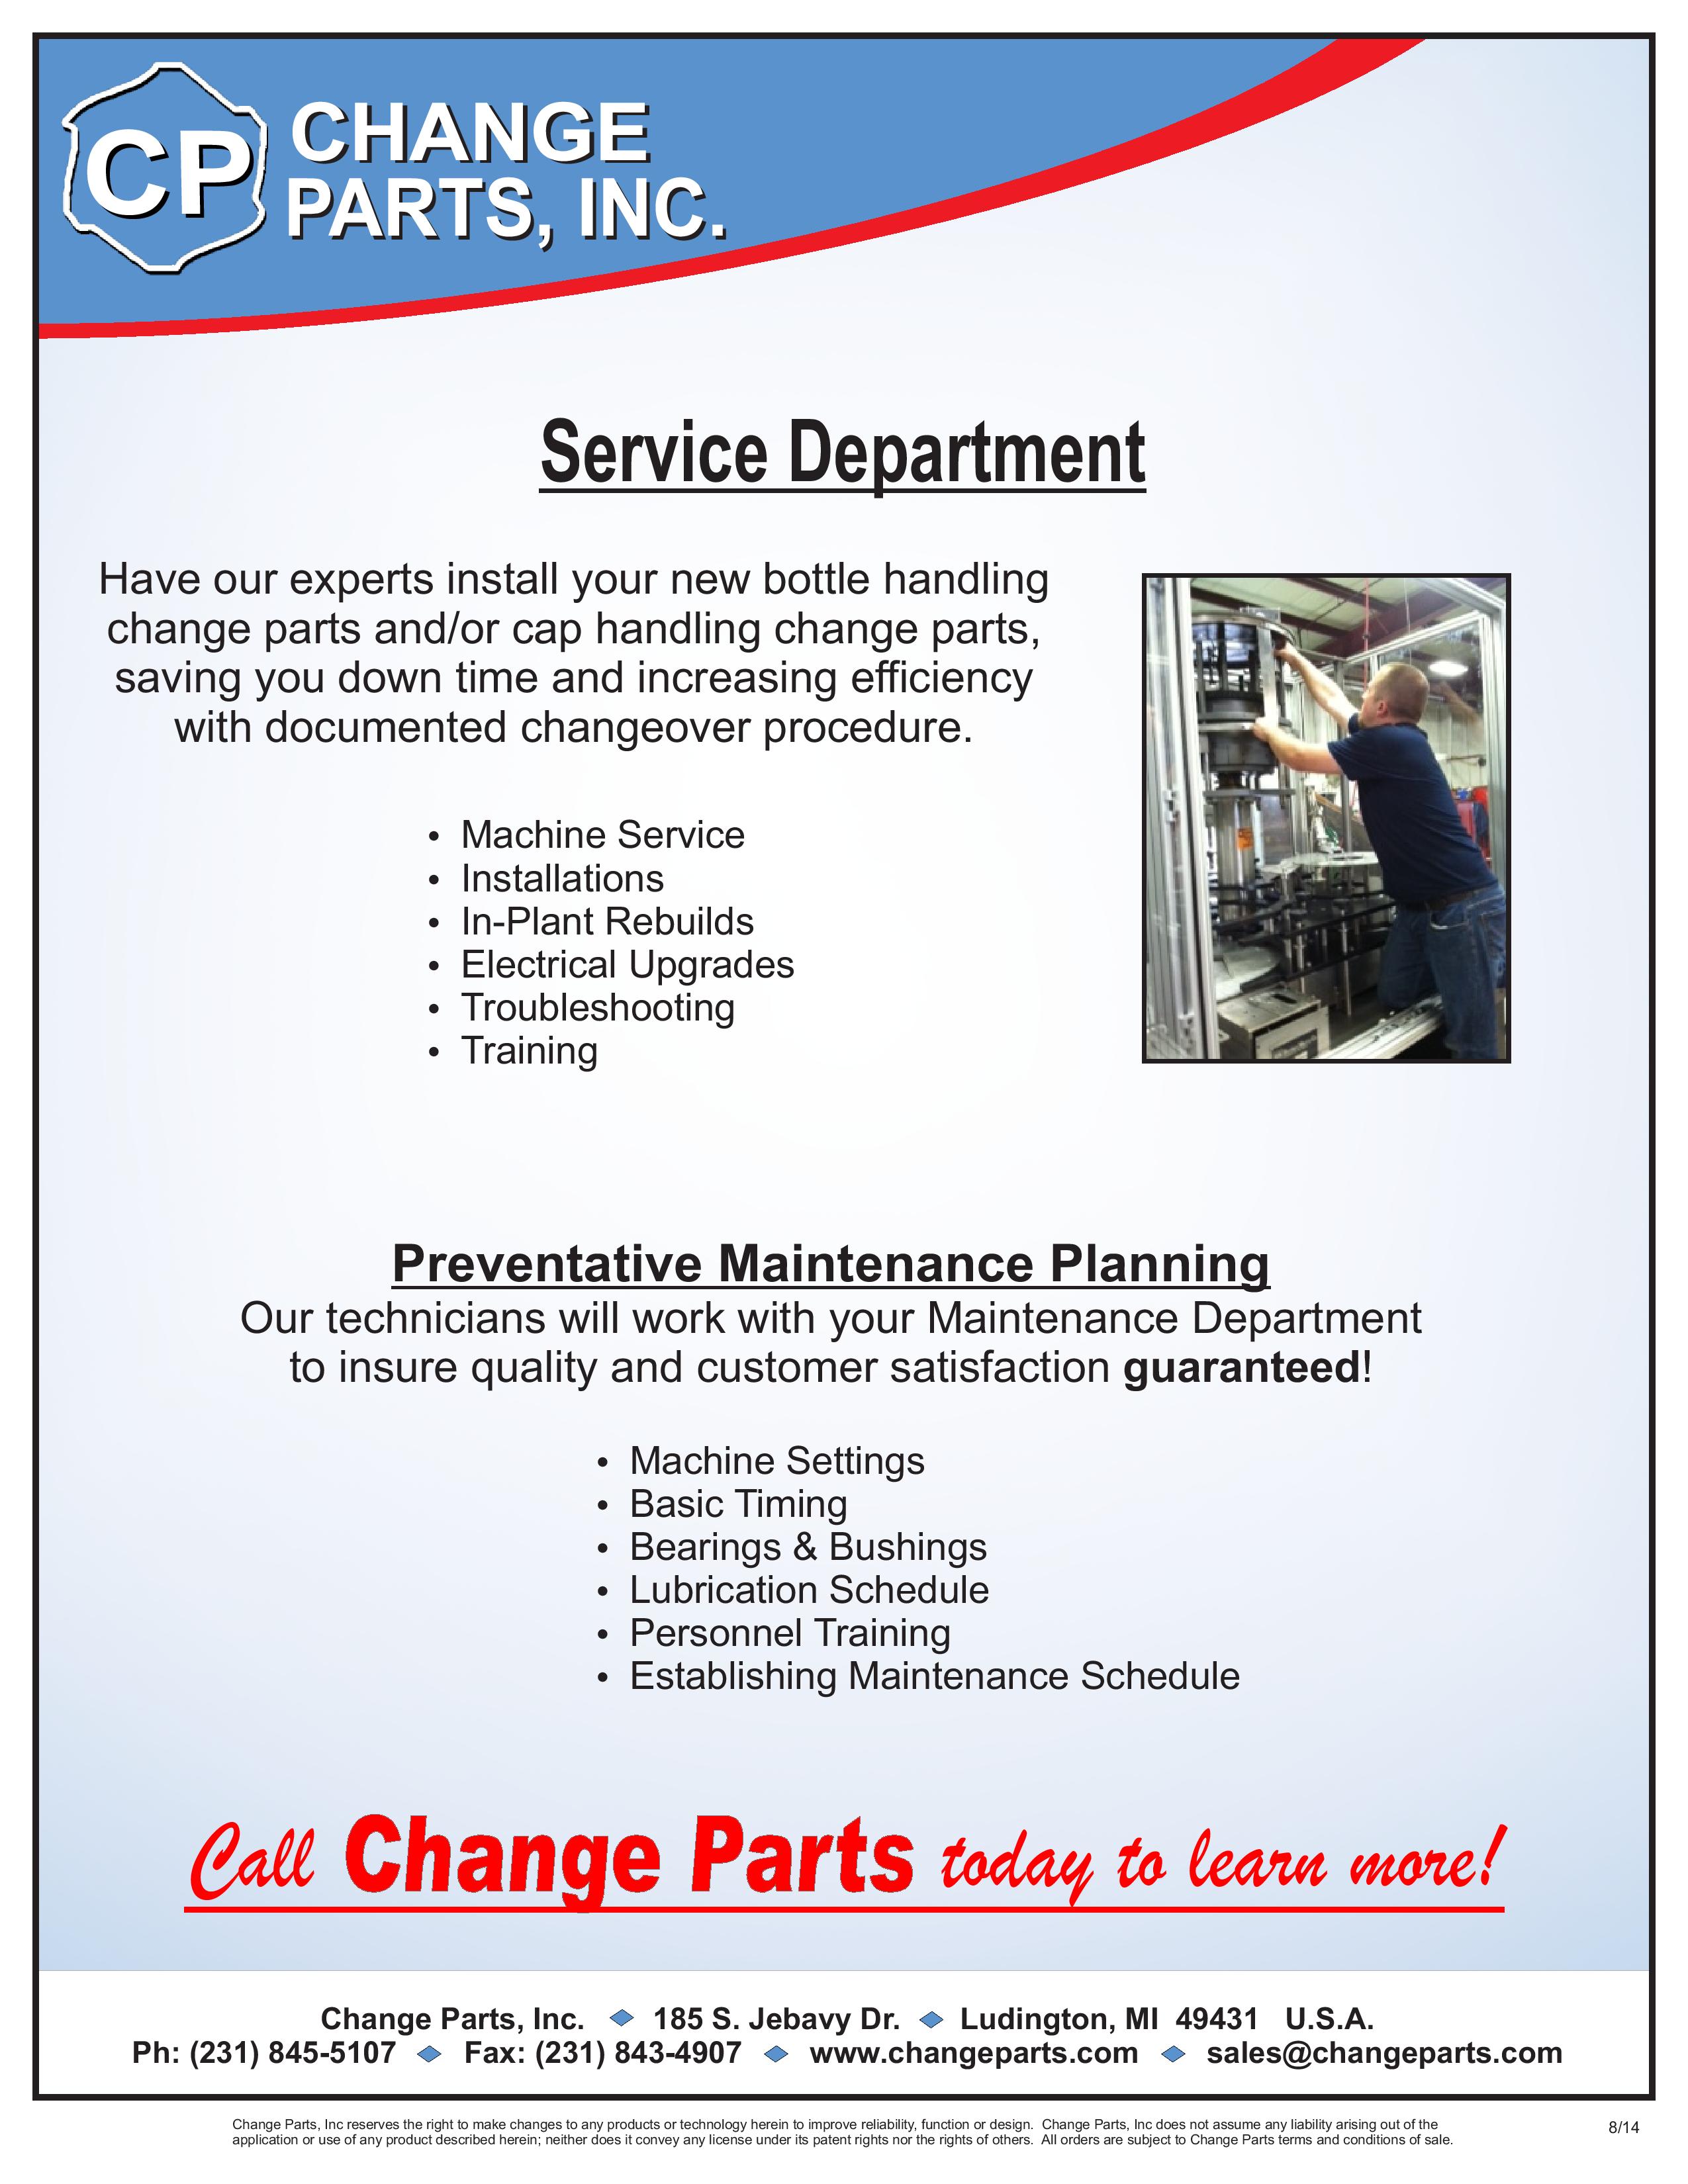 cpi-service-department-page-001.jpg